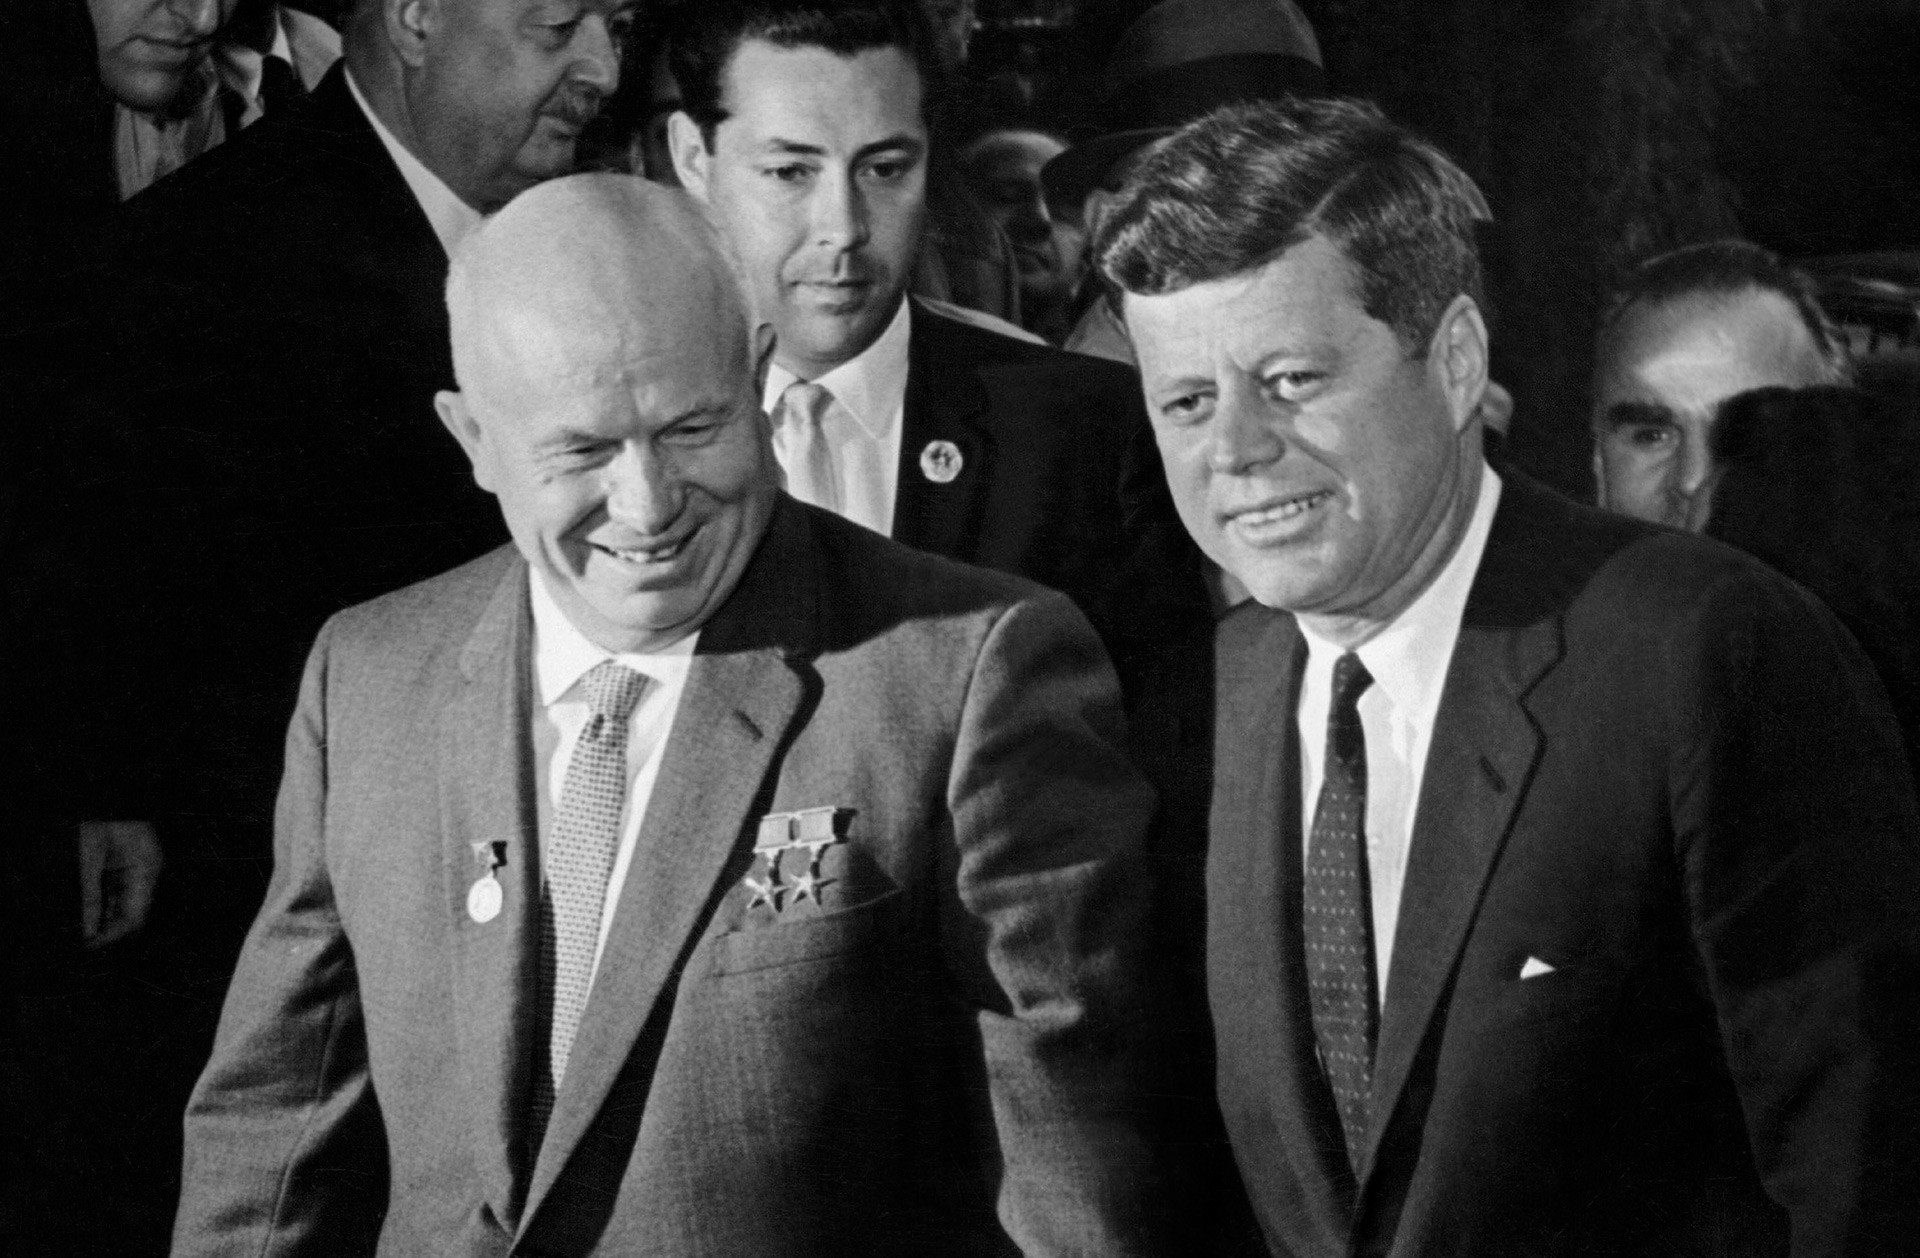 Nikita Khrushchev and John F. Kennedy - Feklisov and Scali were communicating on their behalf, in fact.